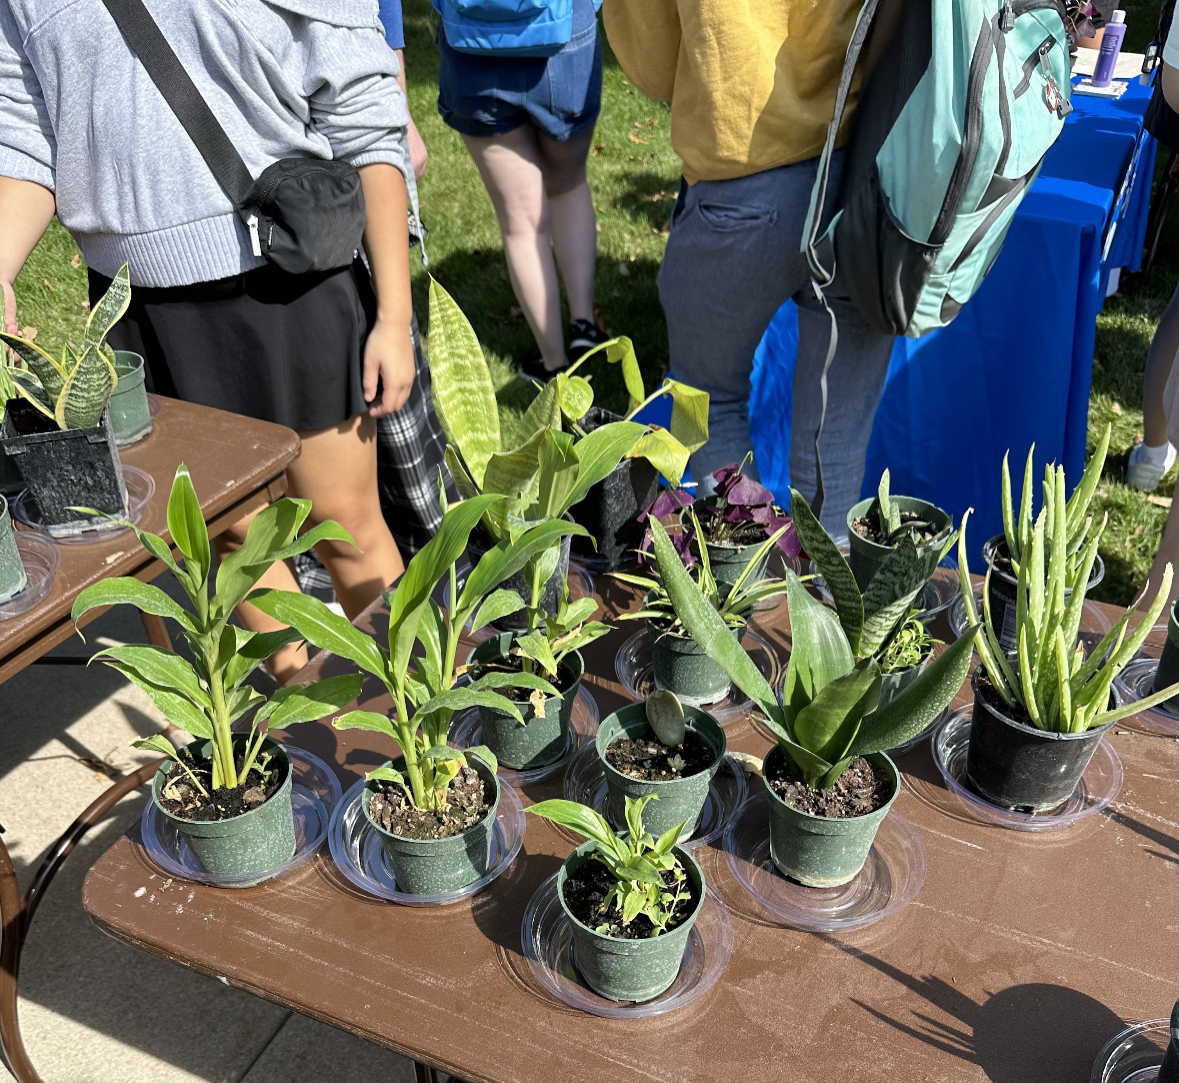 Cacti, succulents and more were out for the taking during the Center for Sustainable Communities plant giveaway on September 29.